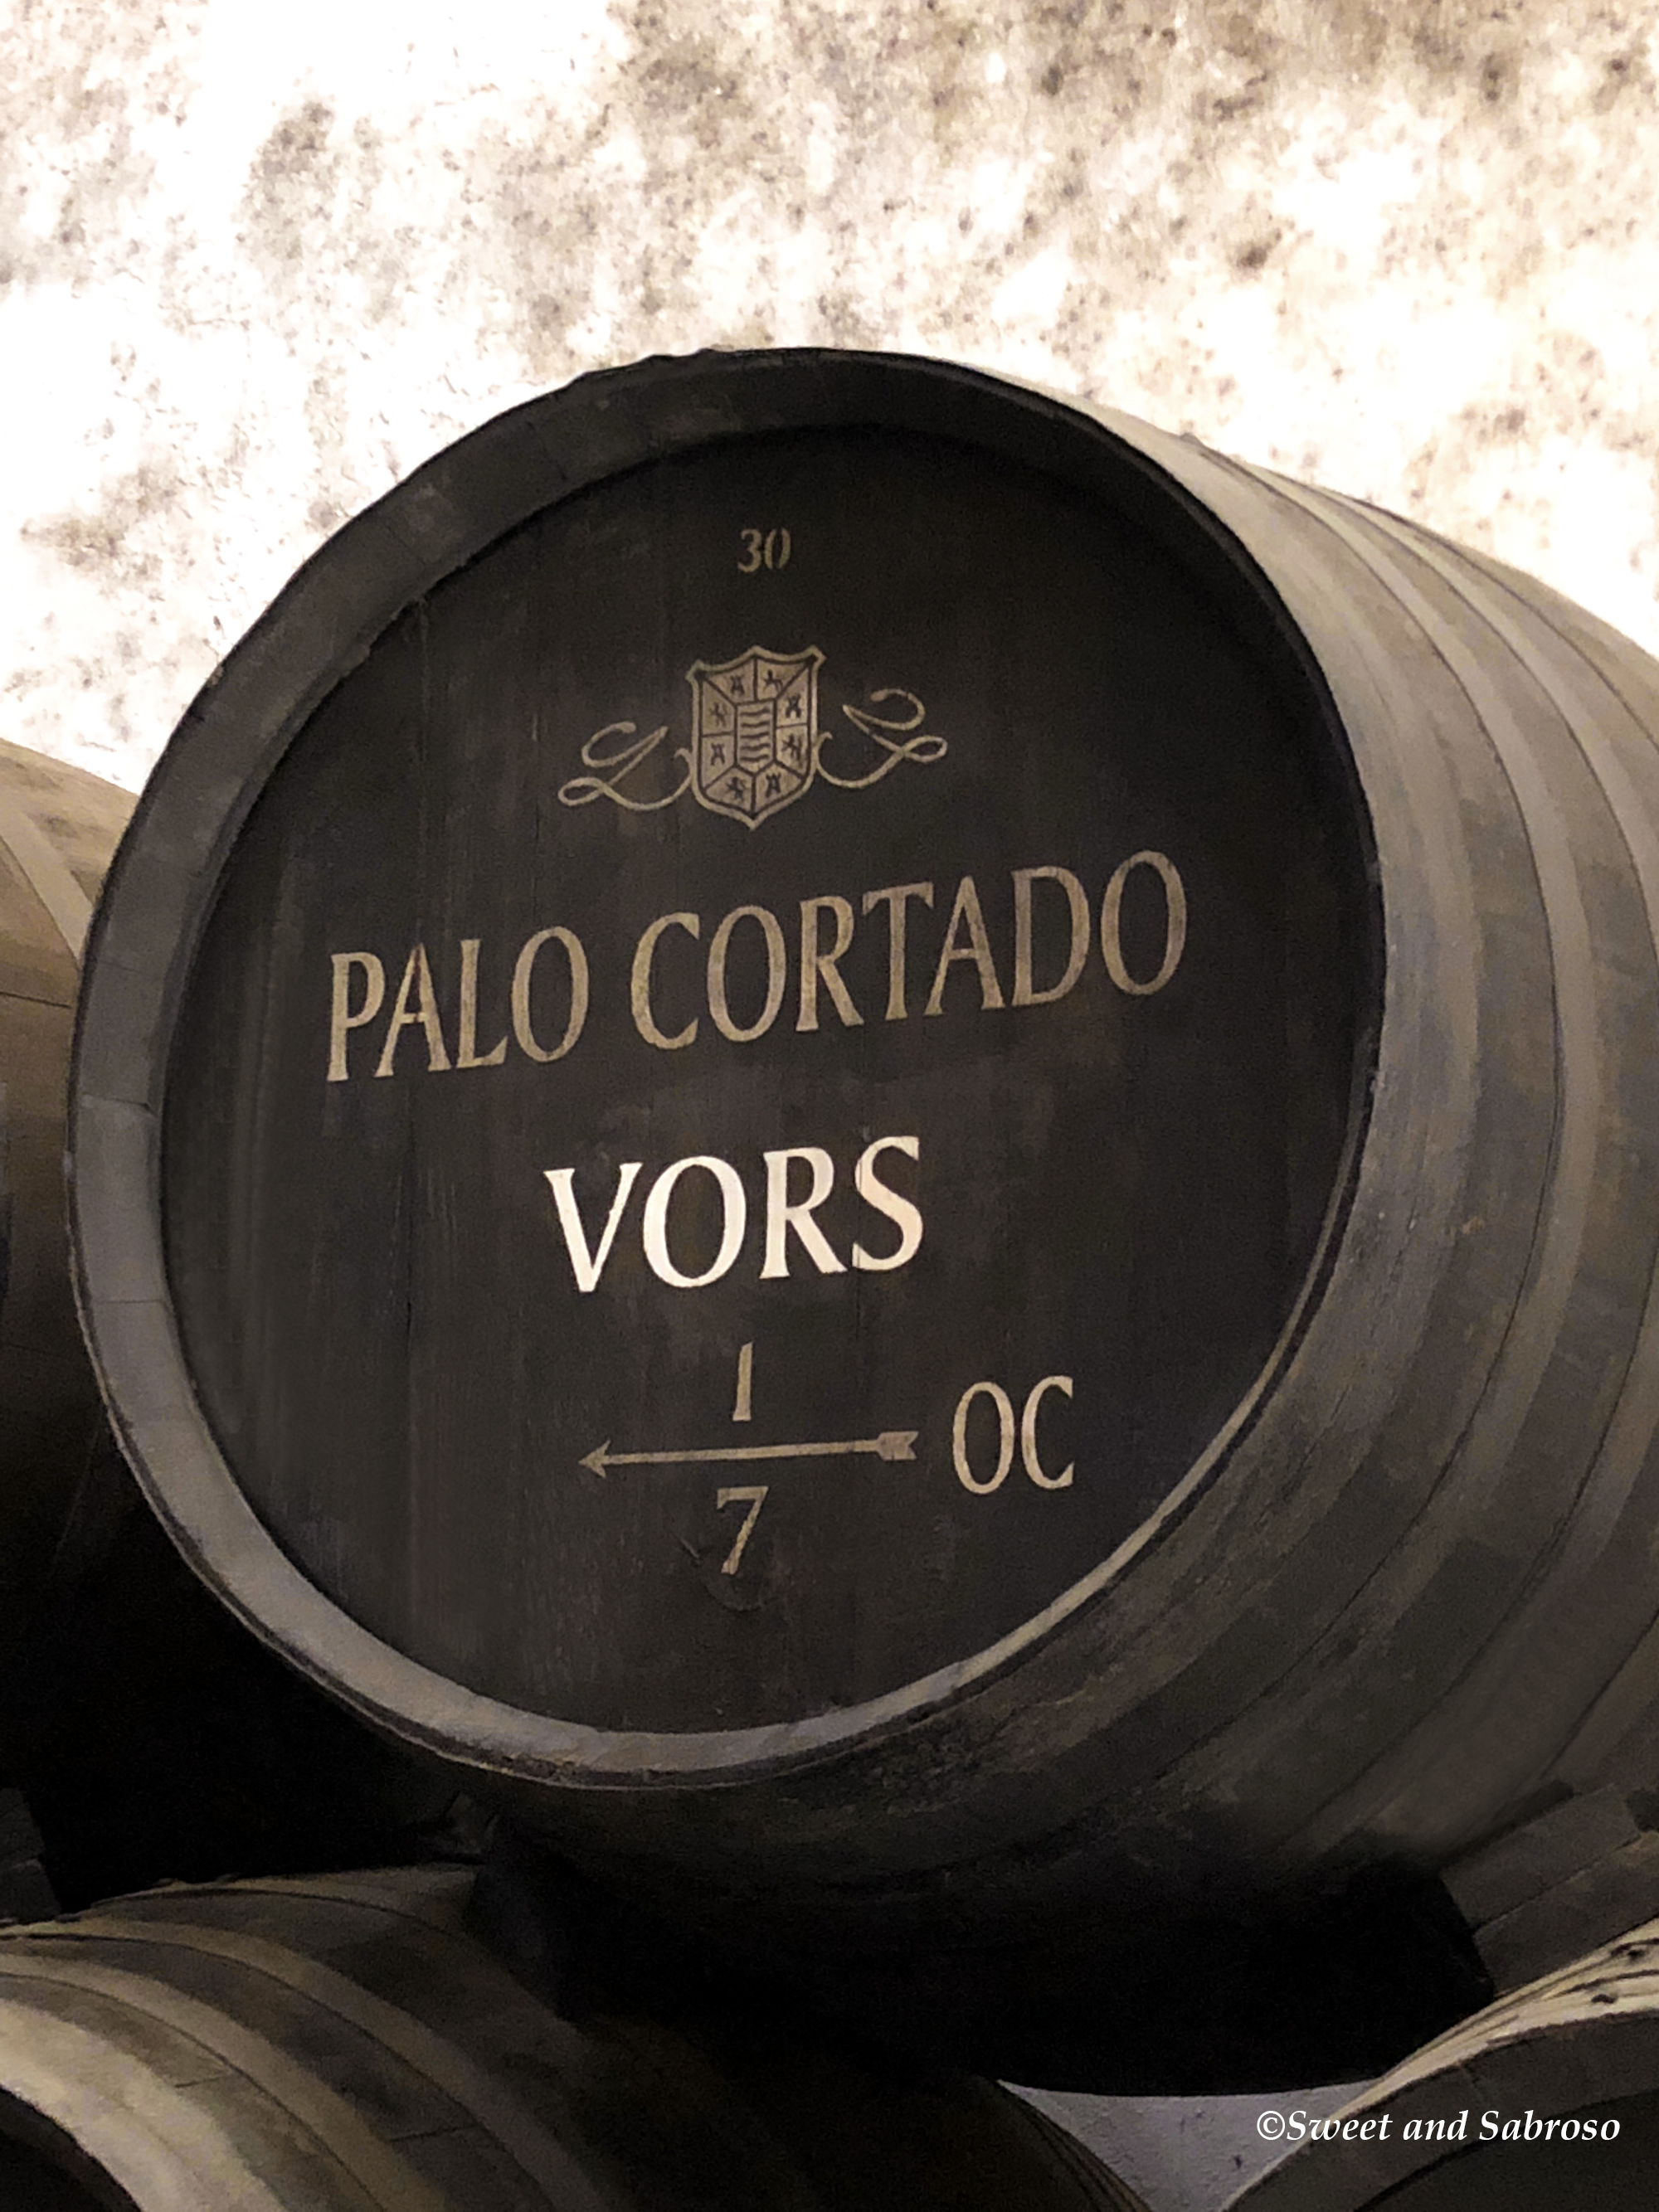 Palo Cortado VORS (30 or more years old) sherry wine cask